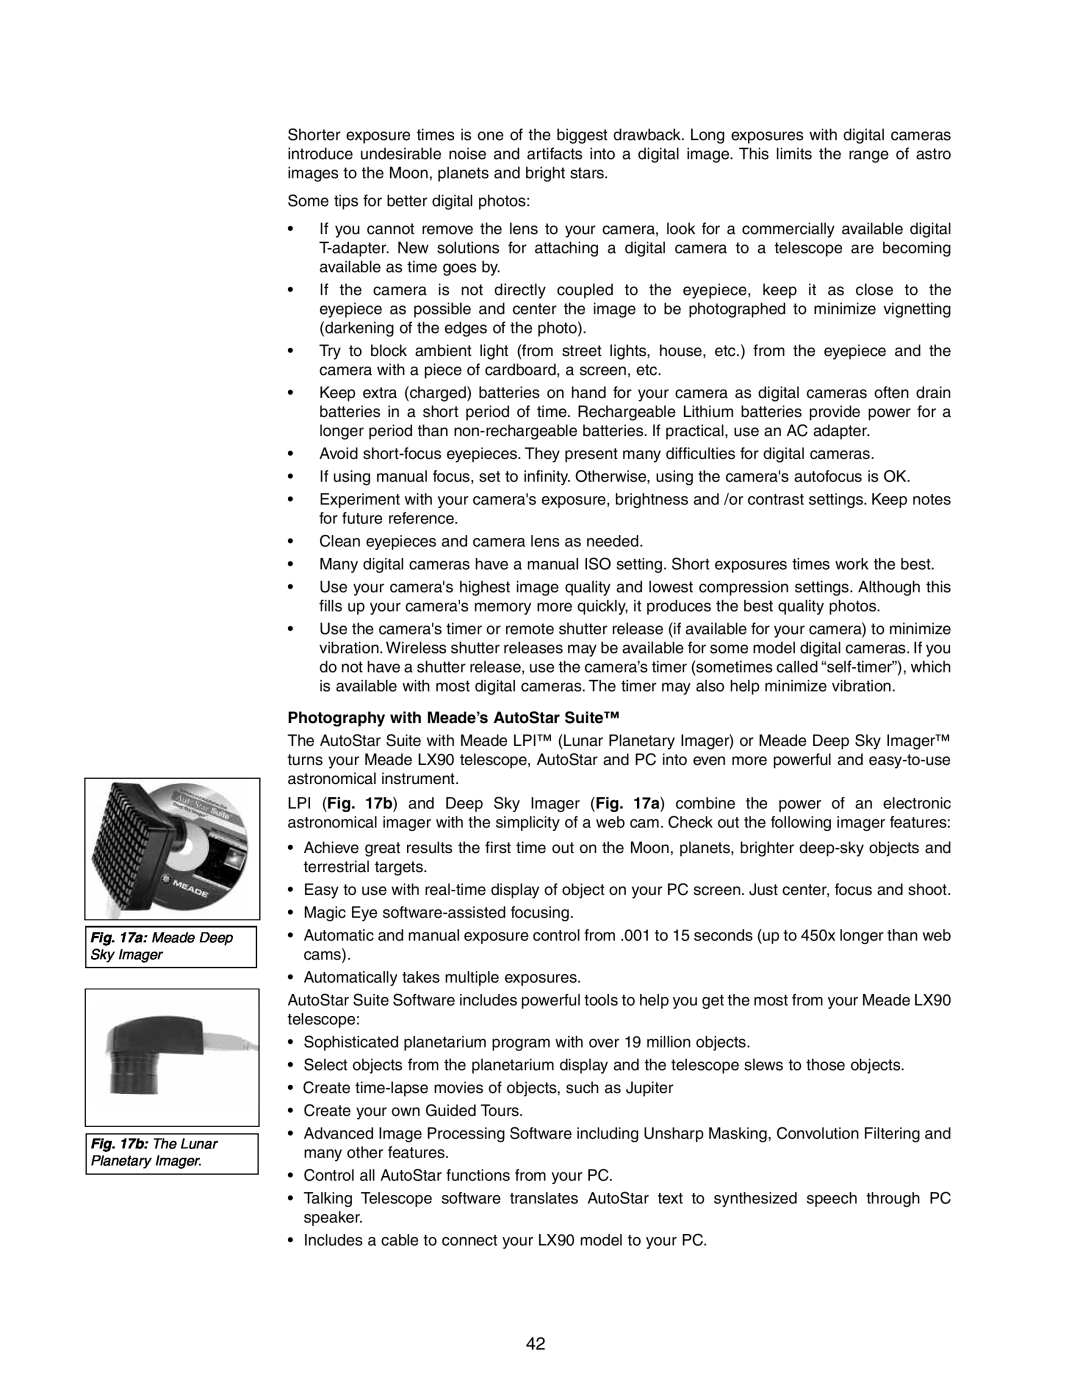 Meade LX90GPS instruction manual Photography with Meade’s AutoStar Suite 